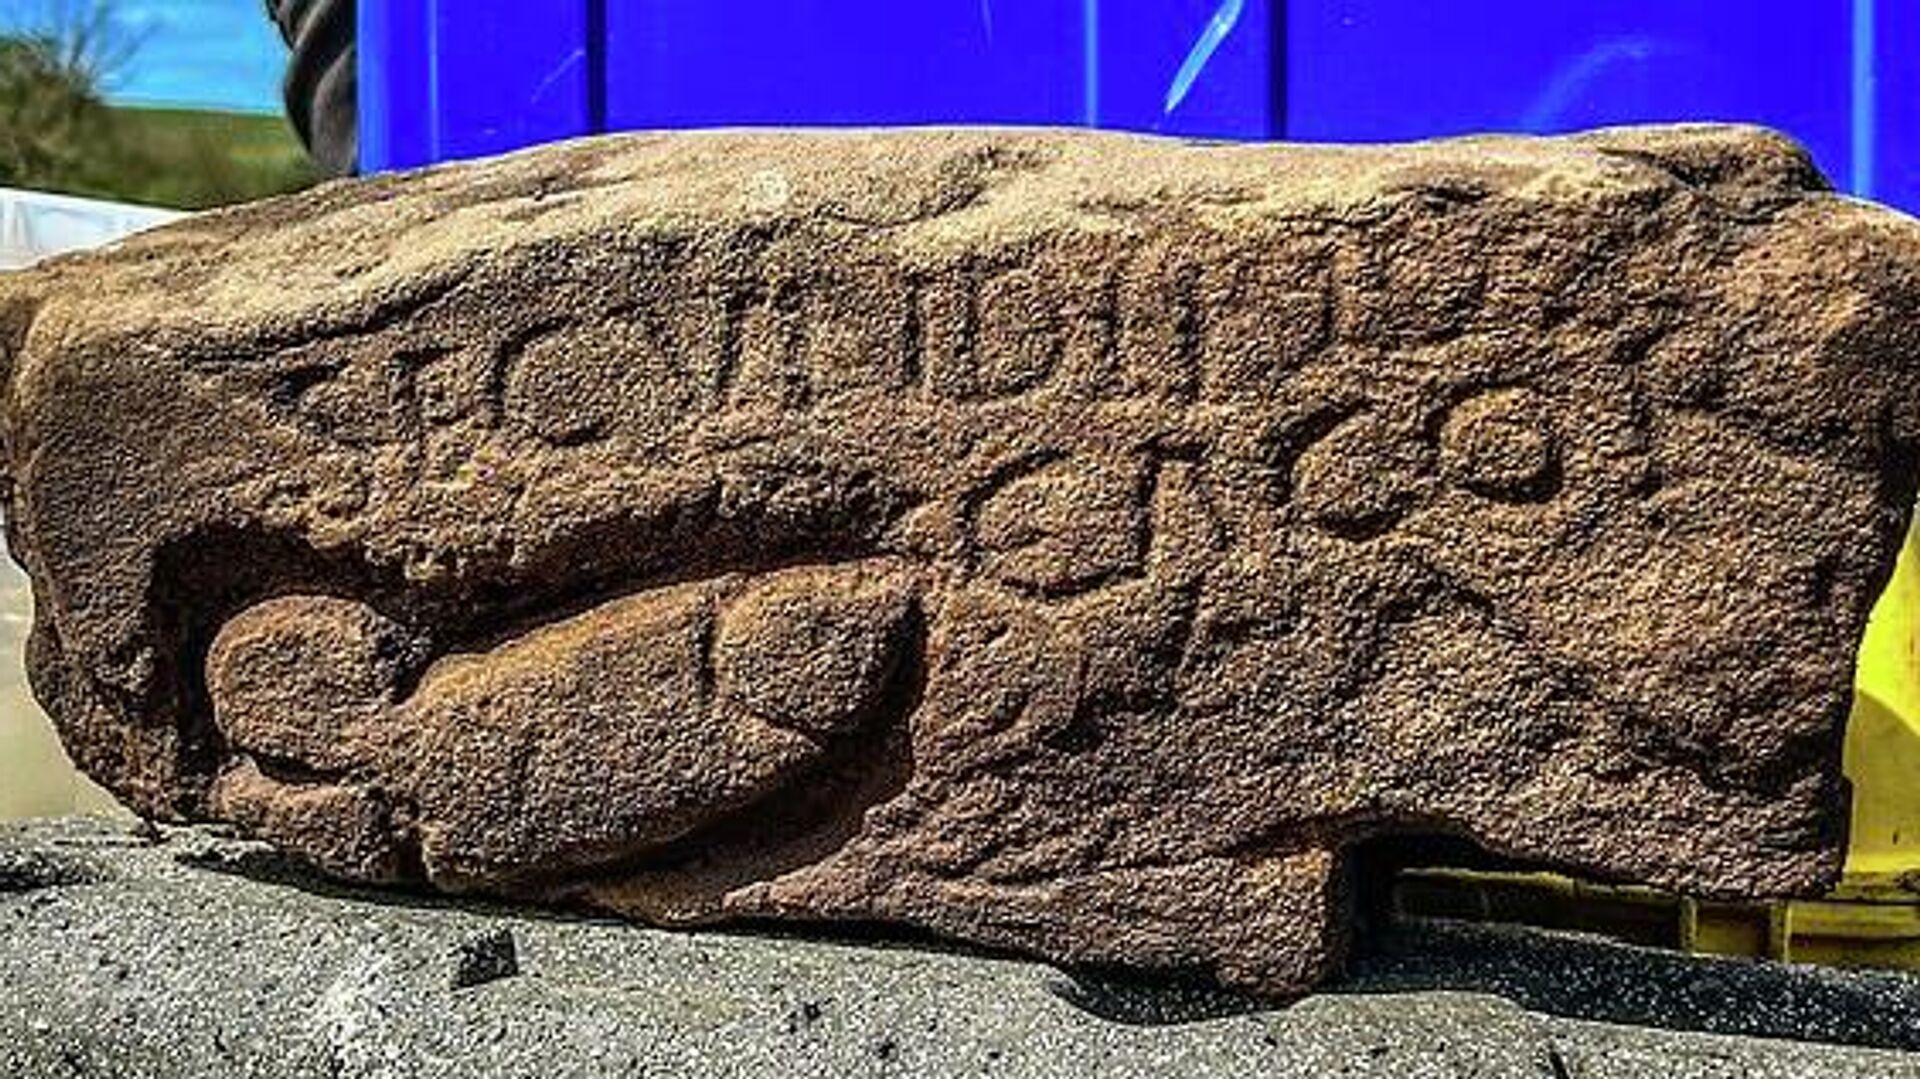 Researchers have discovered a large phallus and an inscription which brands a Roman soldier called Secundinus a 's***ter' at the historic site, dating back 1,700 years - Sputnik International, 1920, 26.05.2022